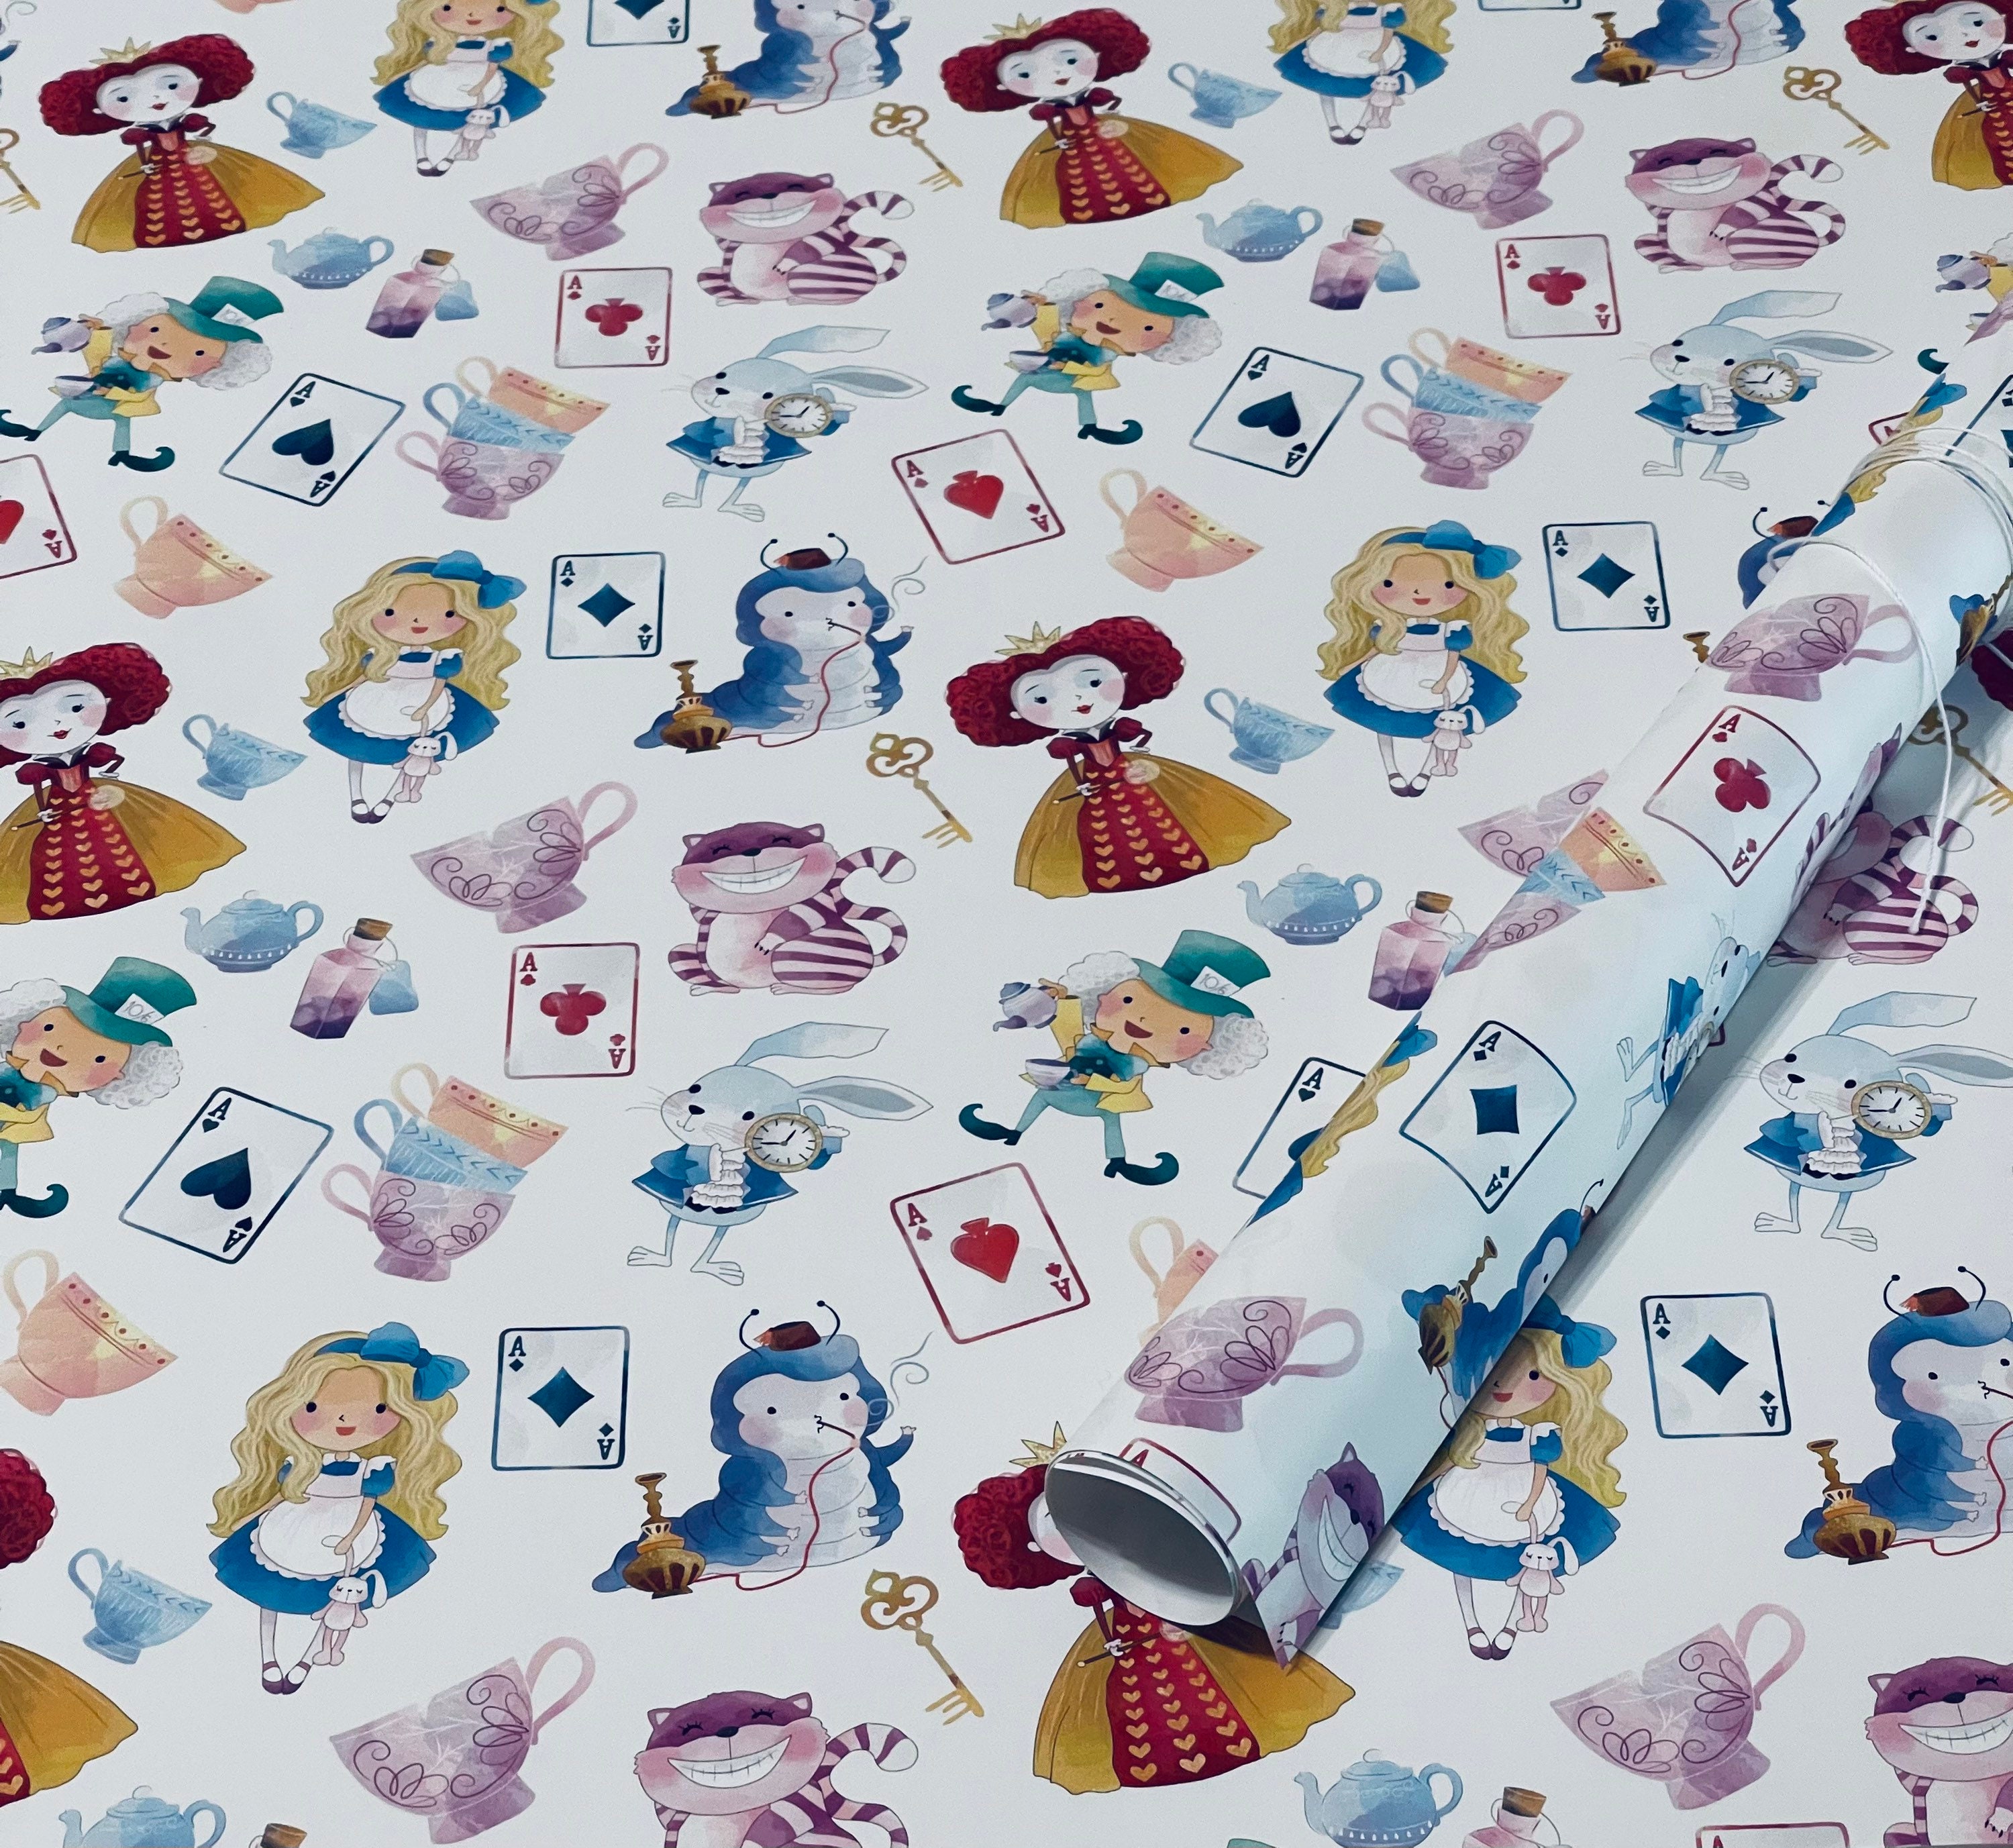 Alice in Wonderland Wrapping Paper Sheets